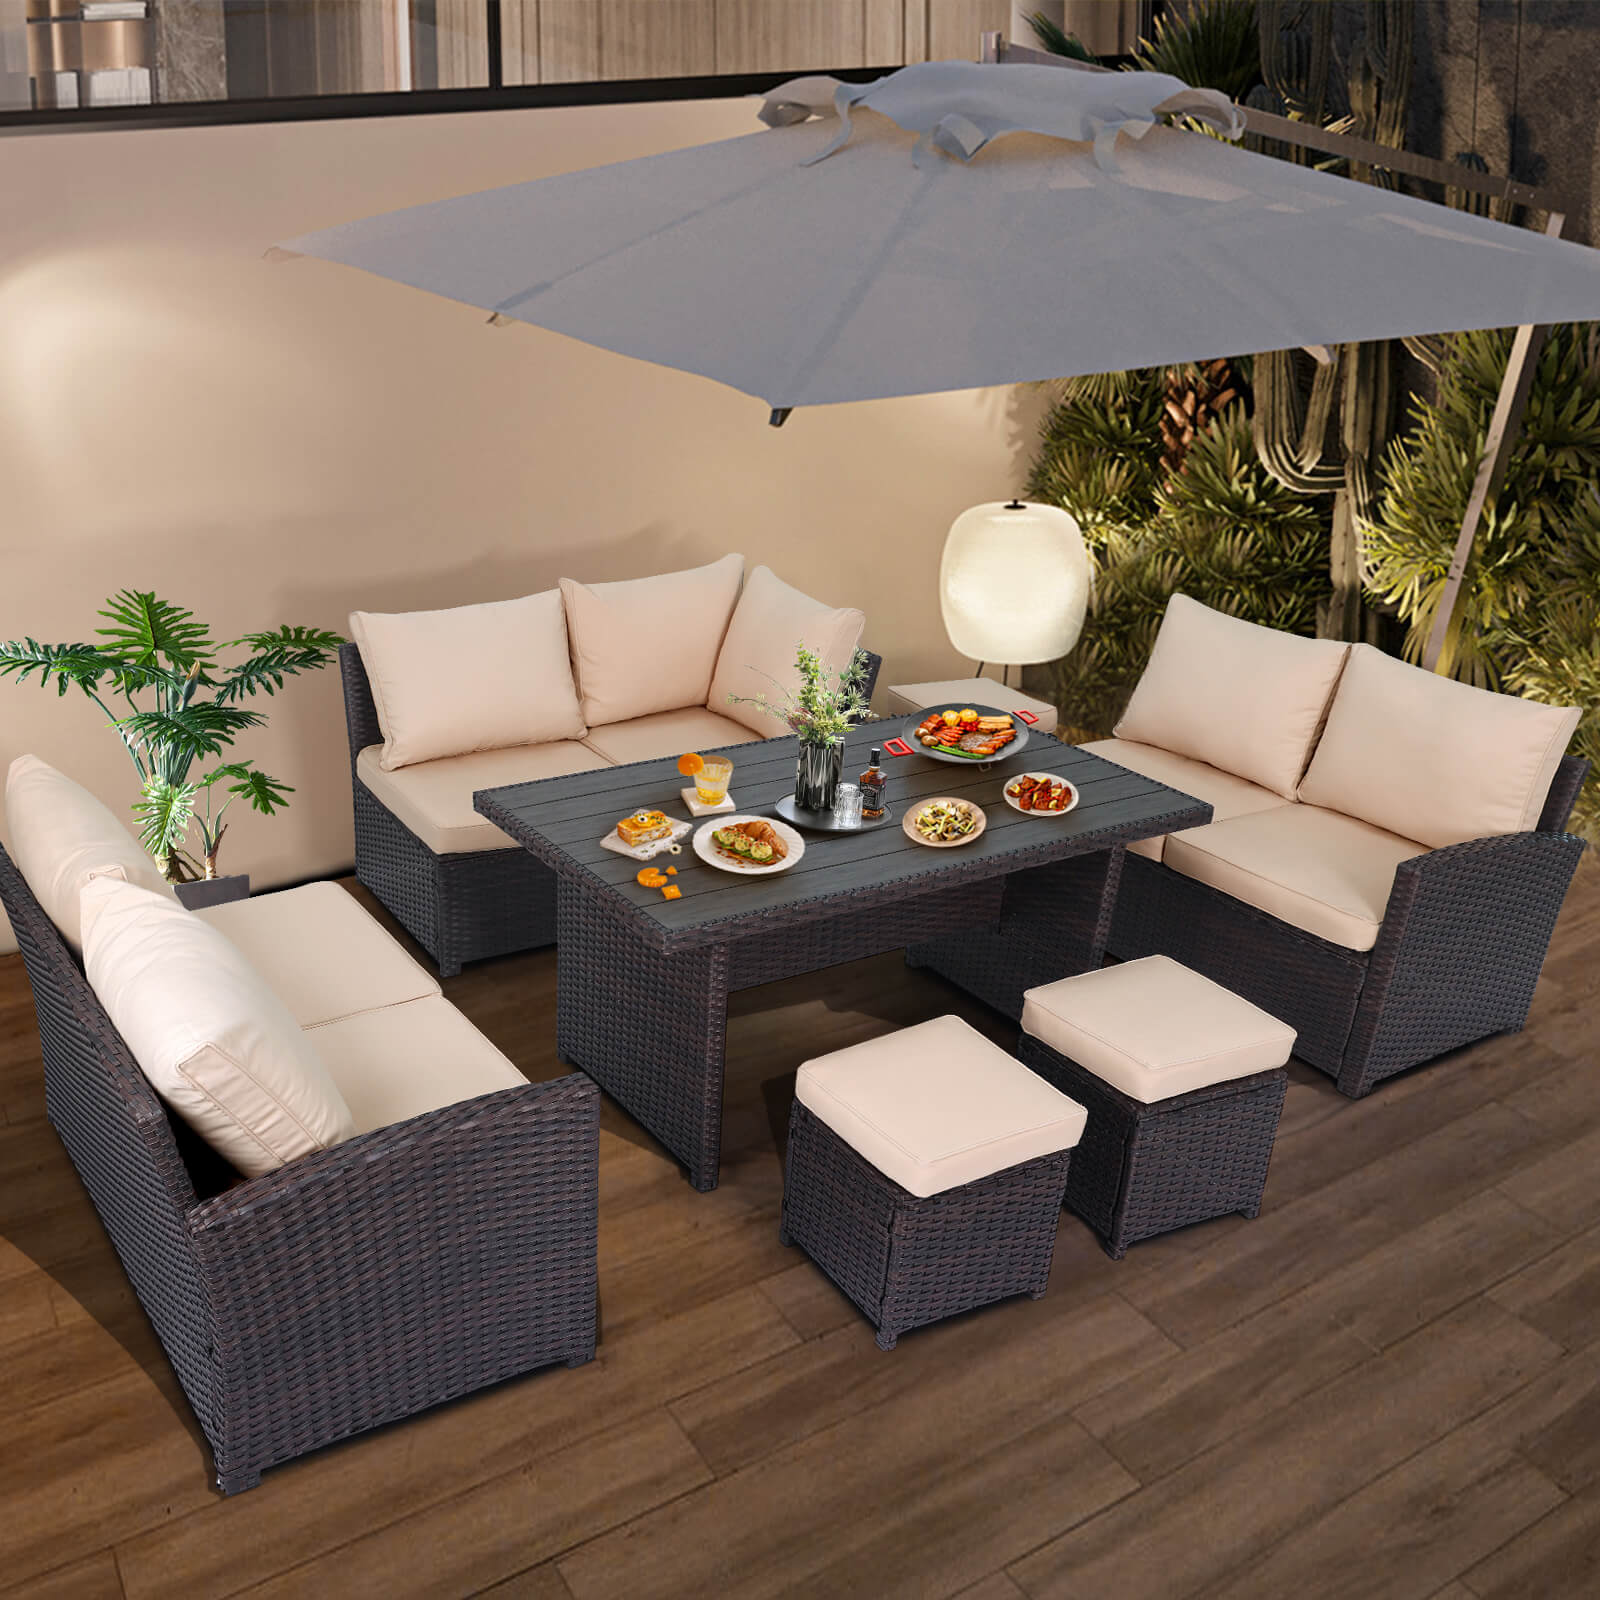 7 Pcs Patio Dining Set All Weather Outdoor Sectional Furniture With Ottoman & Cushion, Khaki